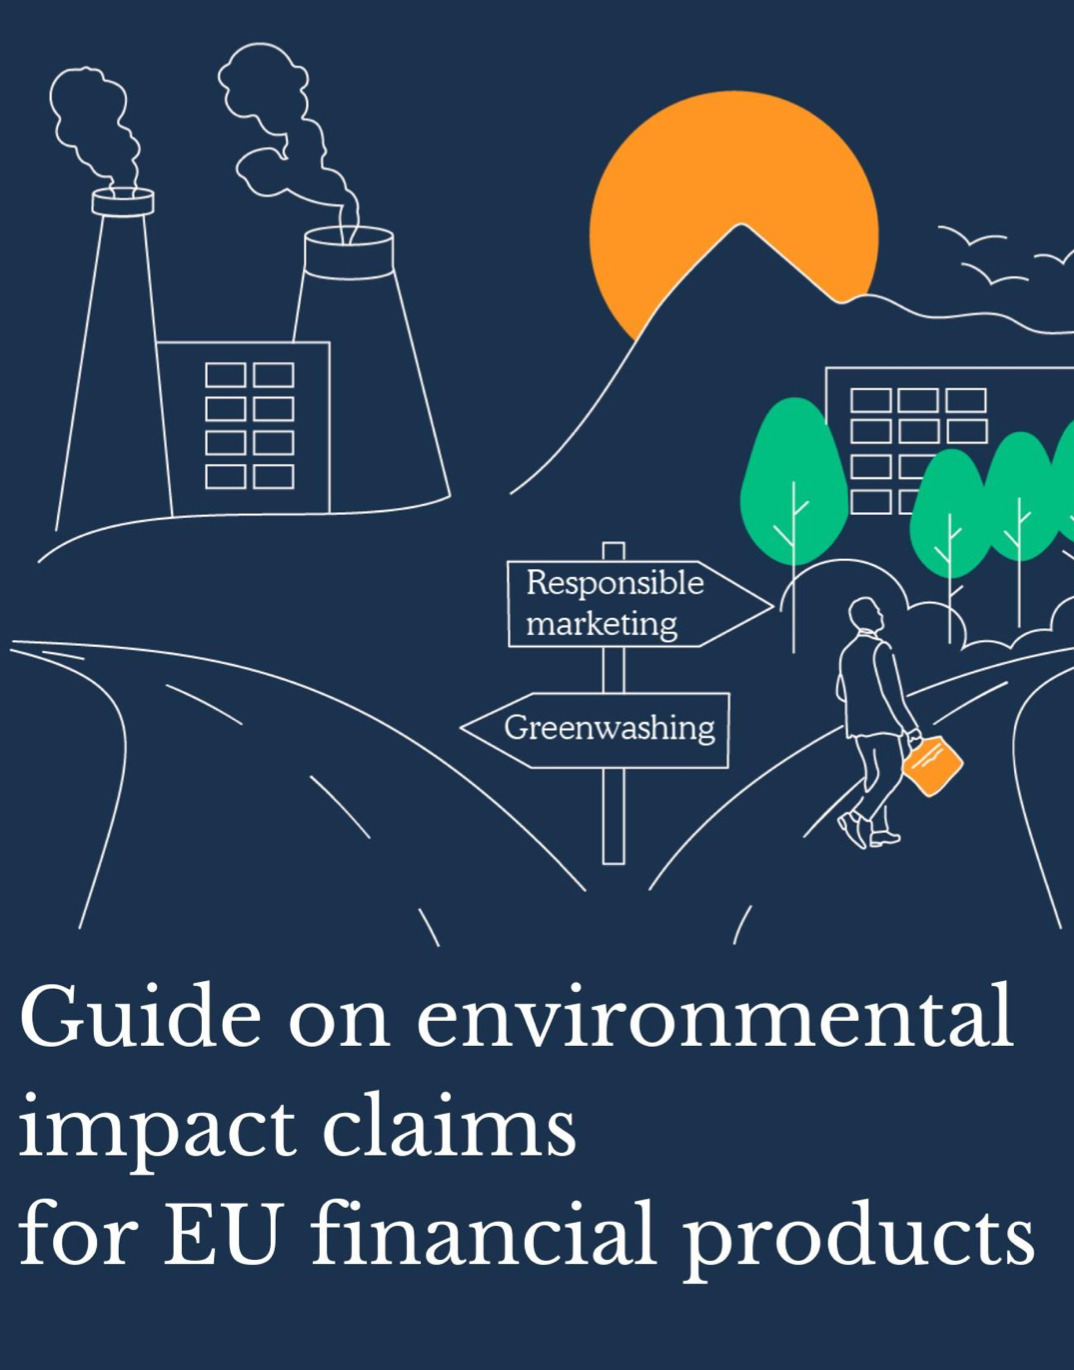 Guide on environmental impact claims for EU financial products